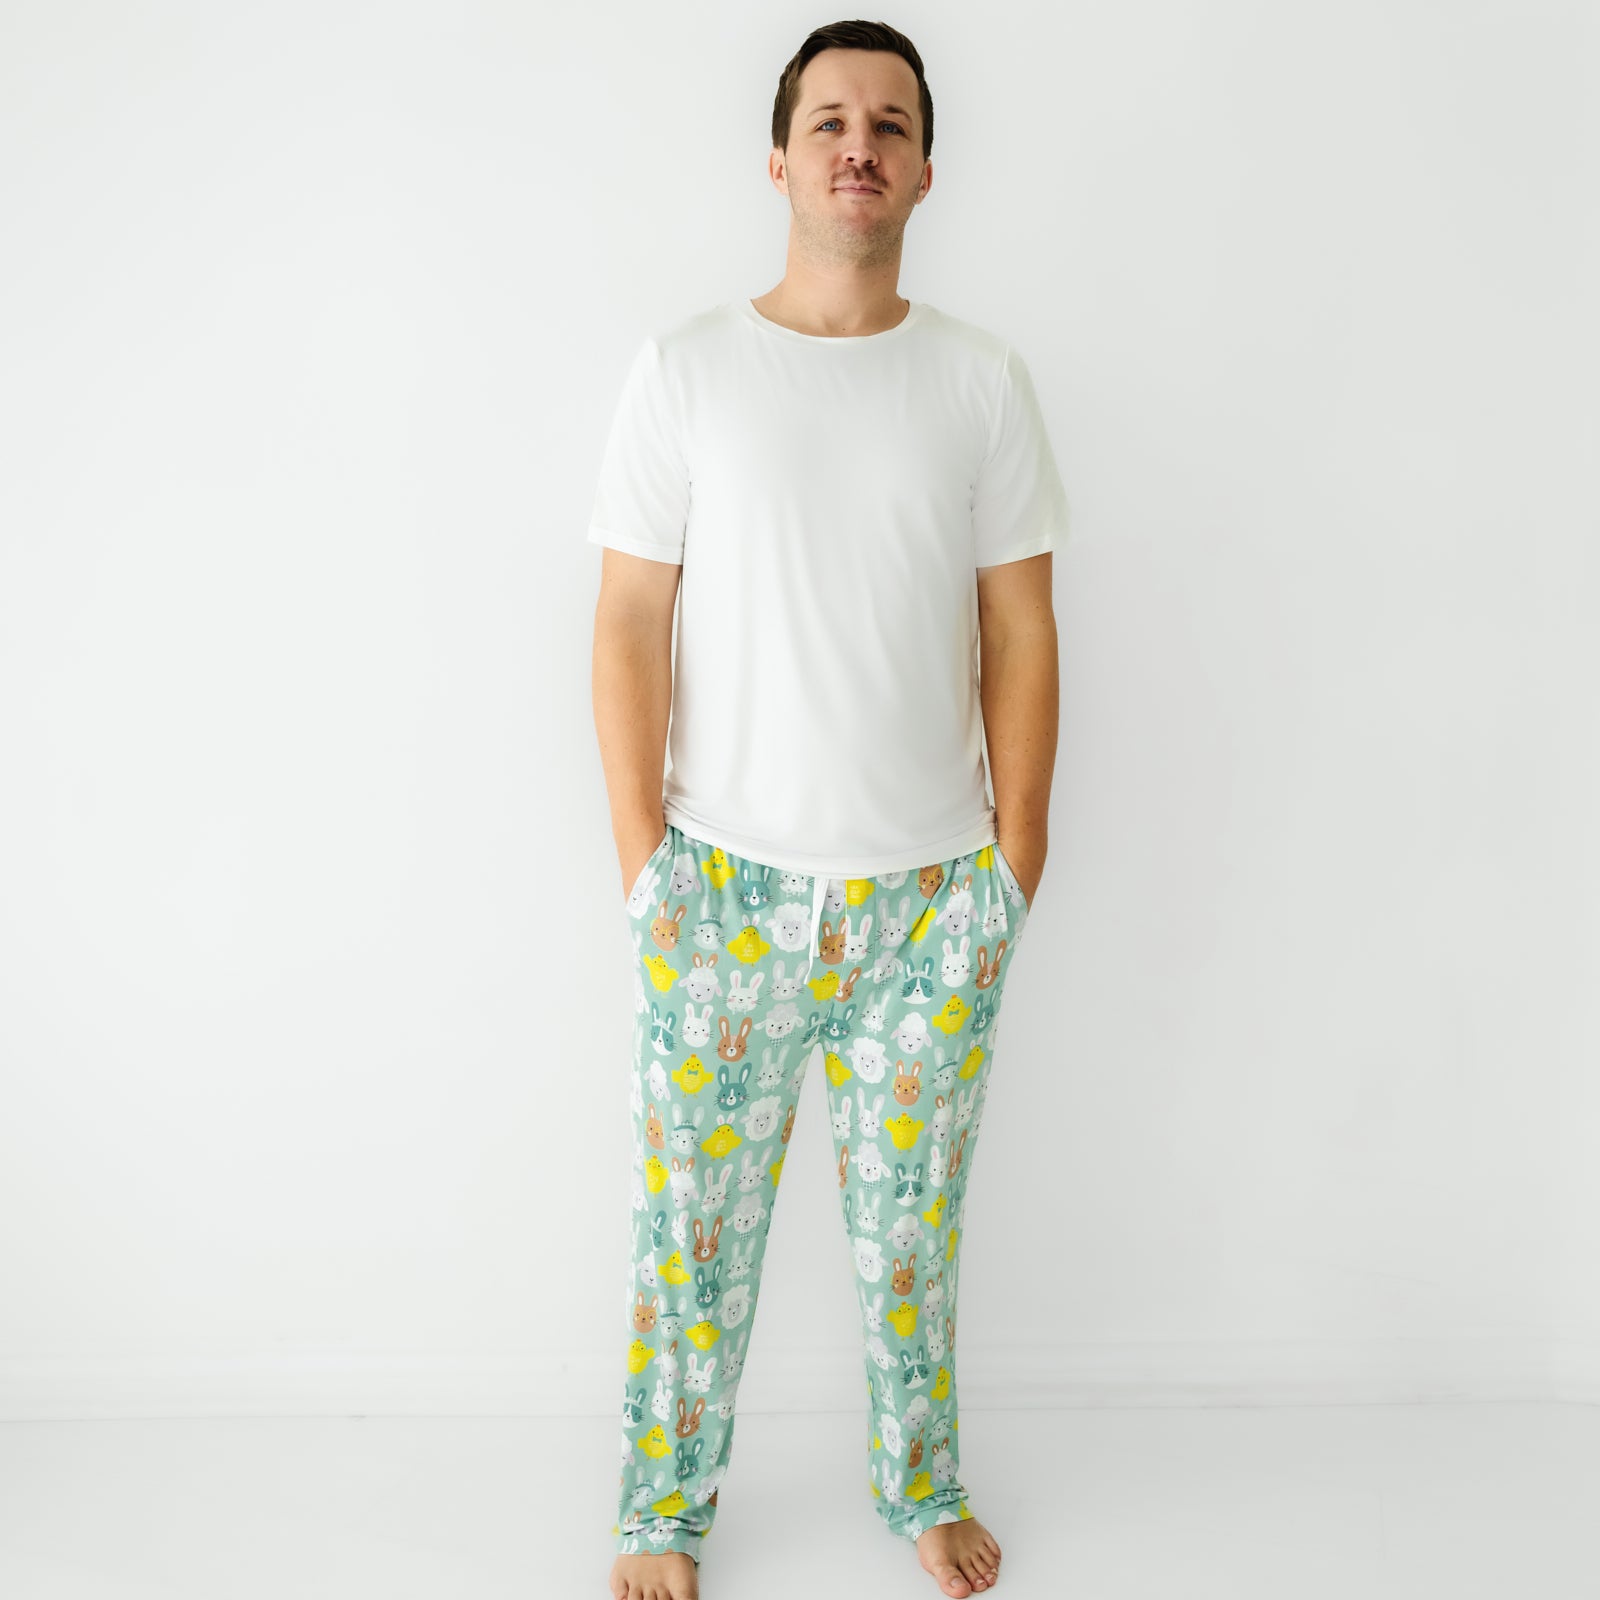 Image of a man wearing Aqua Pastel Parade men's pajama pants paired with a Bright White men's short sleeve pajama top